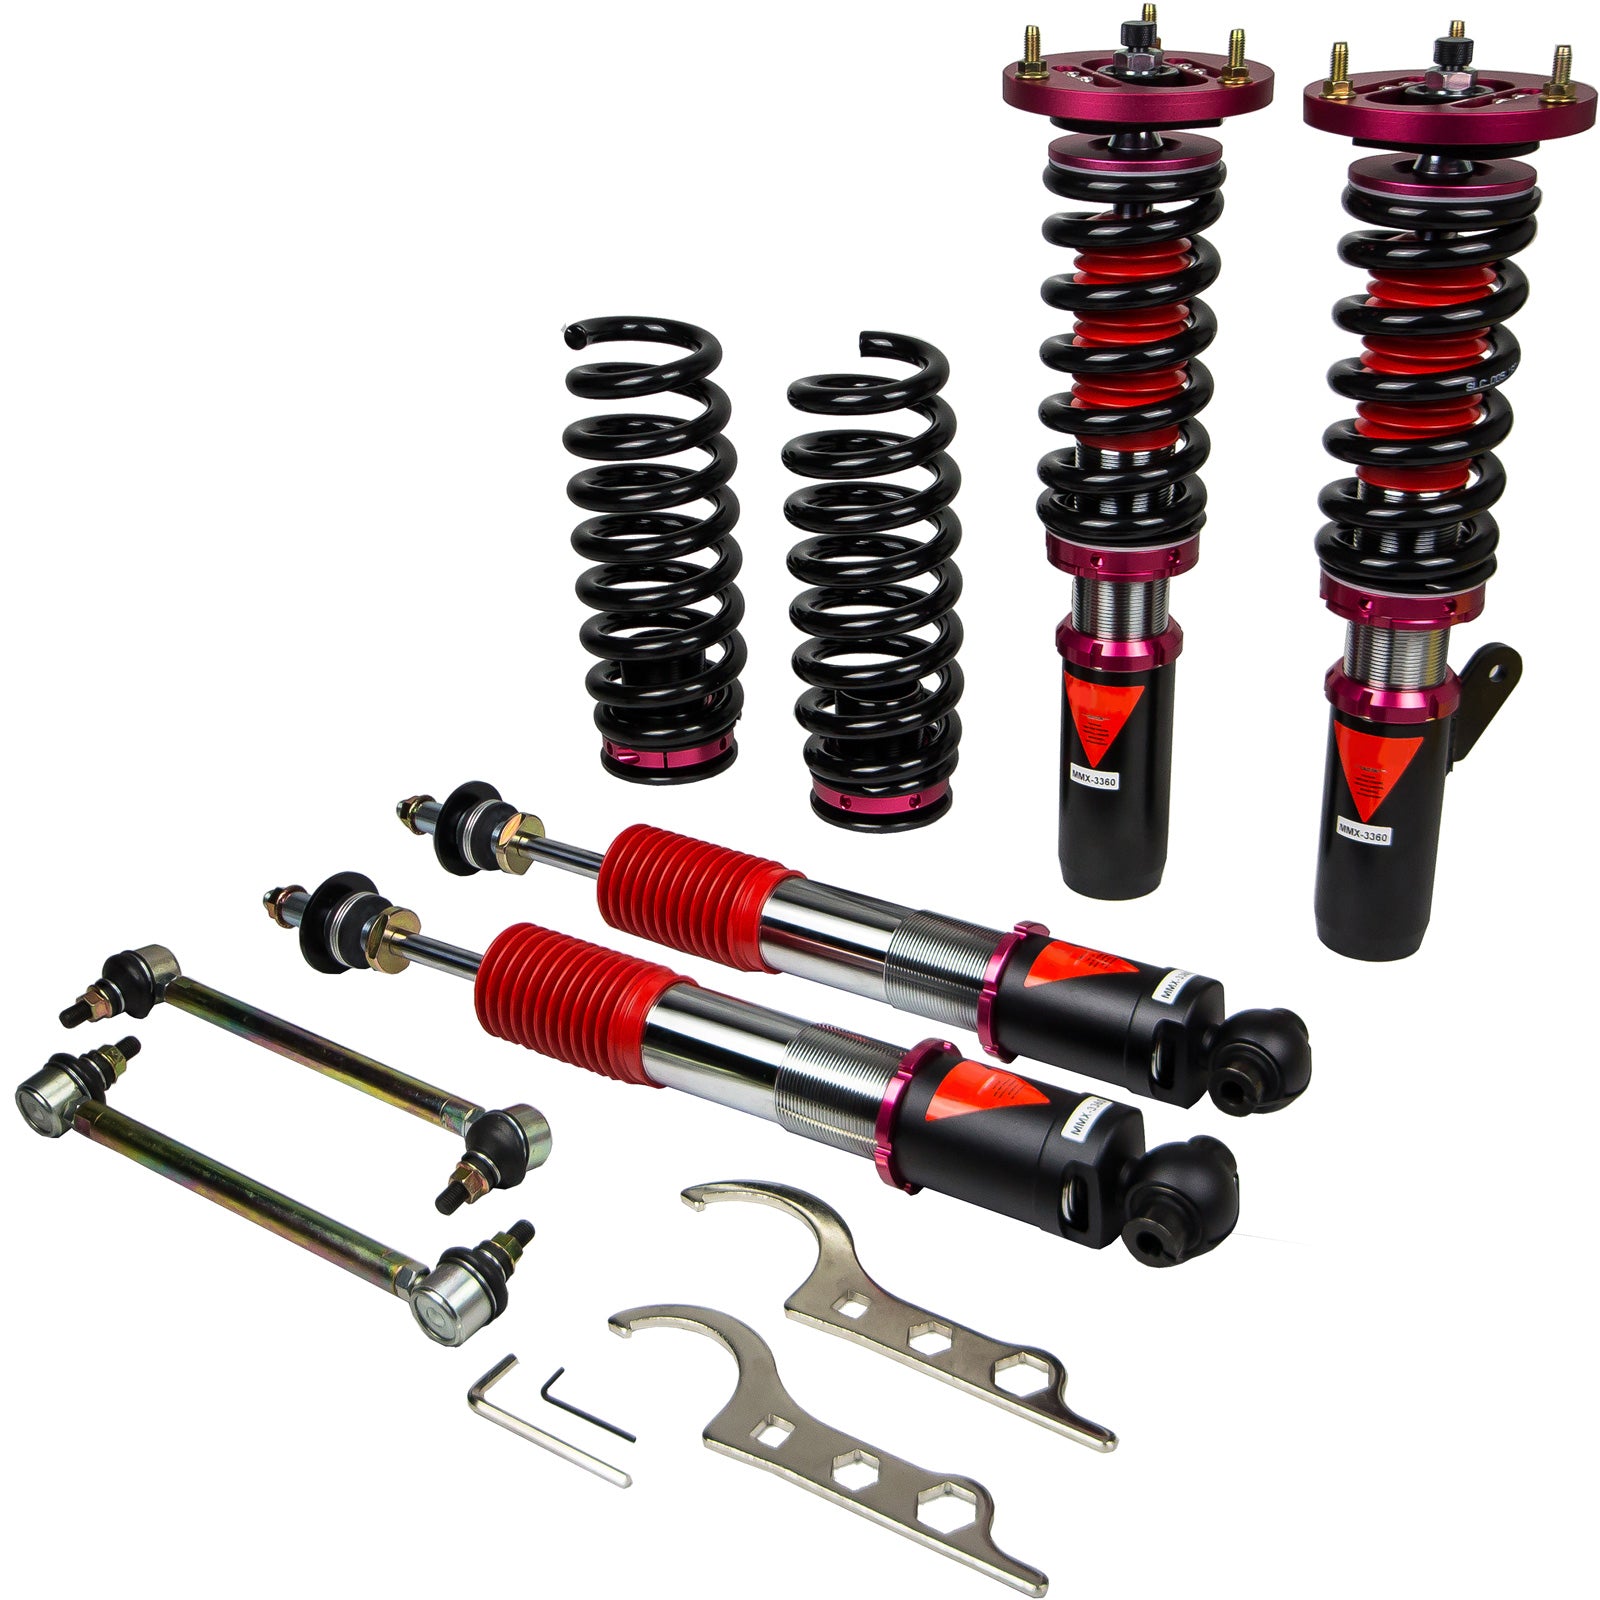 MMX3360 MAXX Coilovers Lowering Kit, Fully Adjustable, Ride Height, 40 Clicks Rebound Settings, BMW M3(E90/E92/E93) 07-13